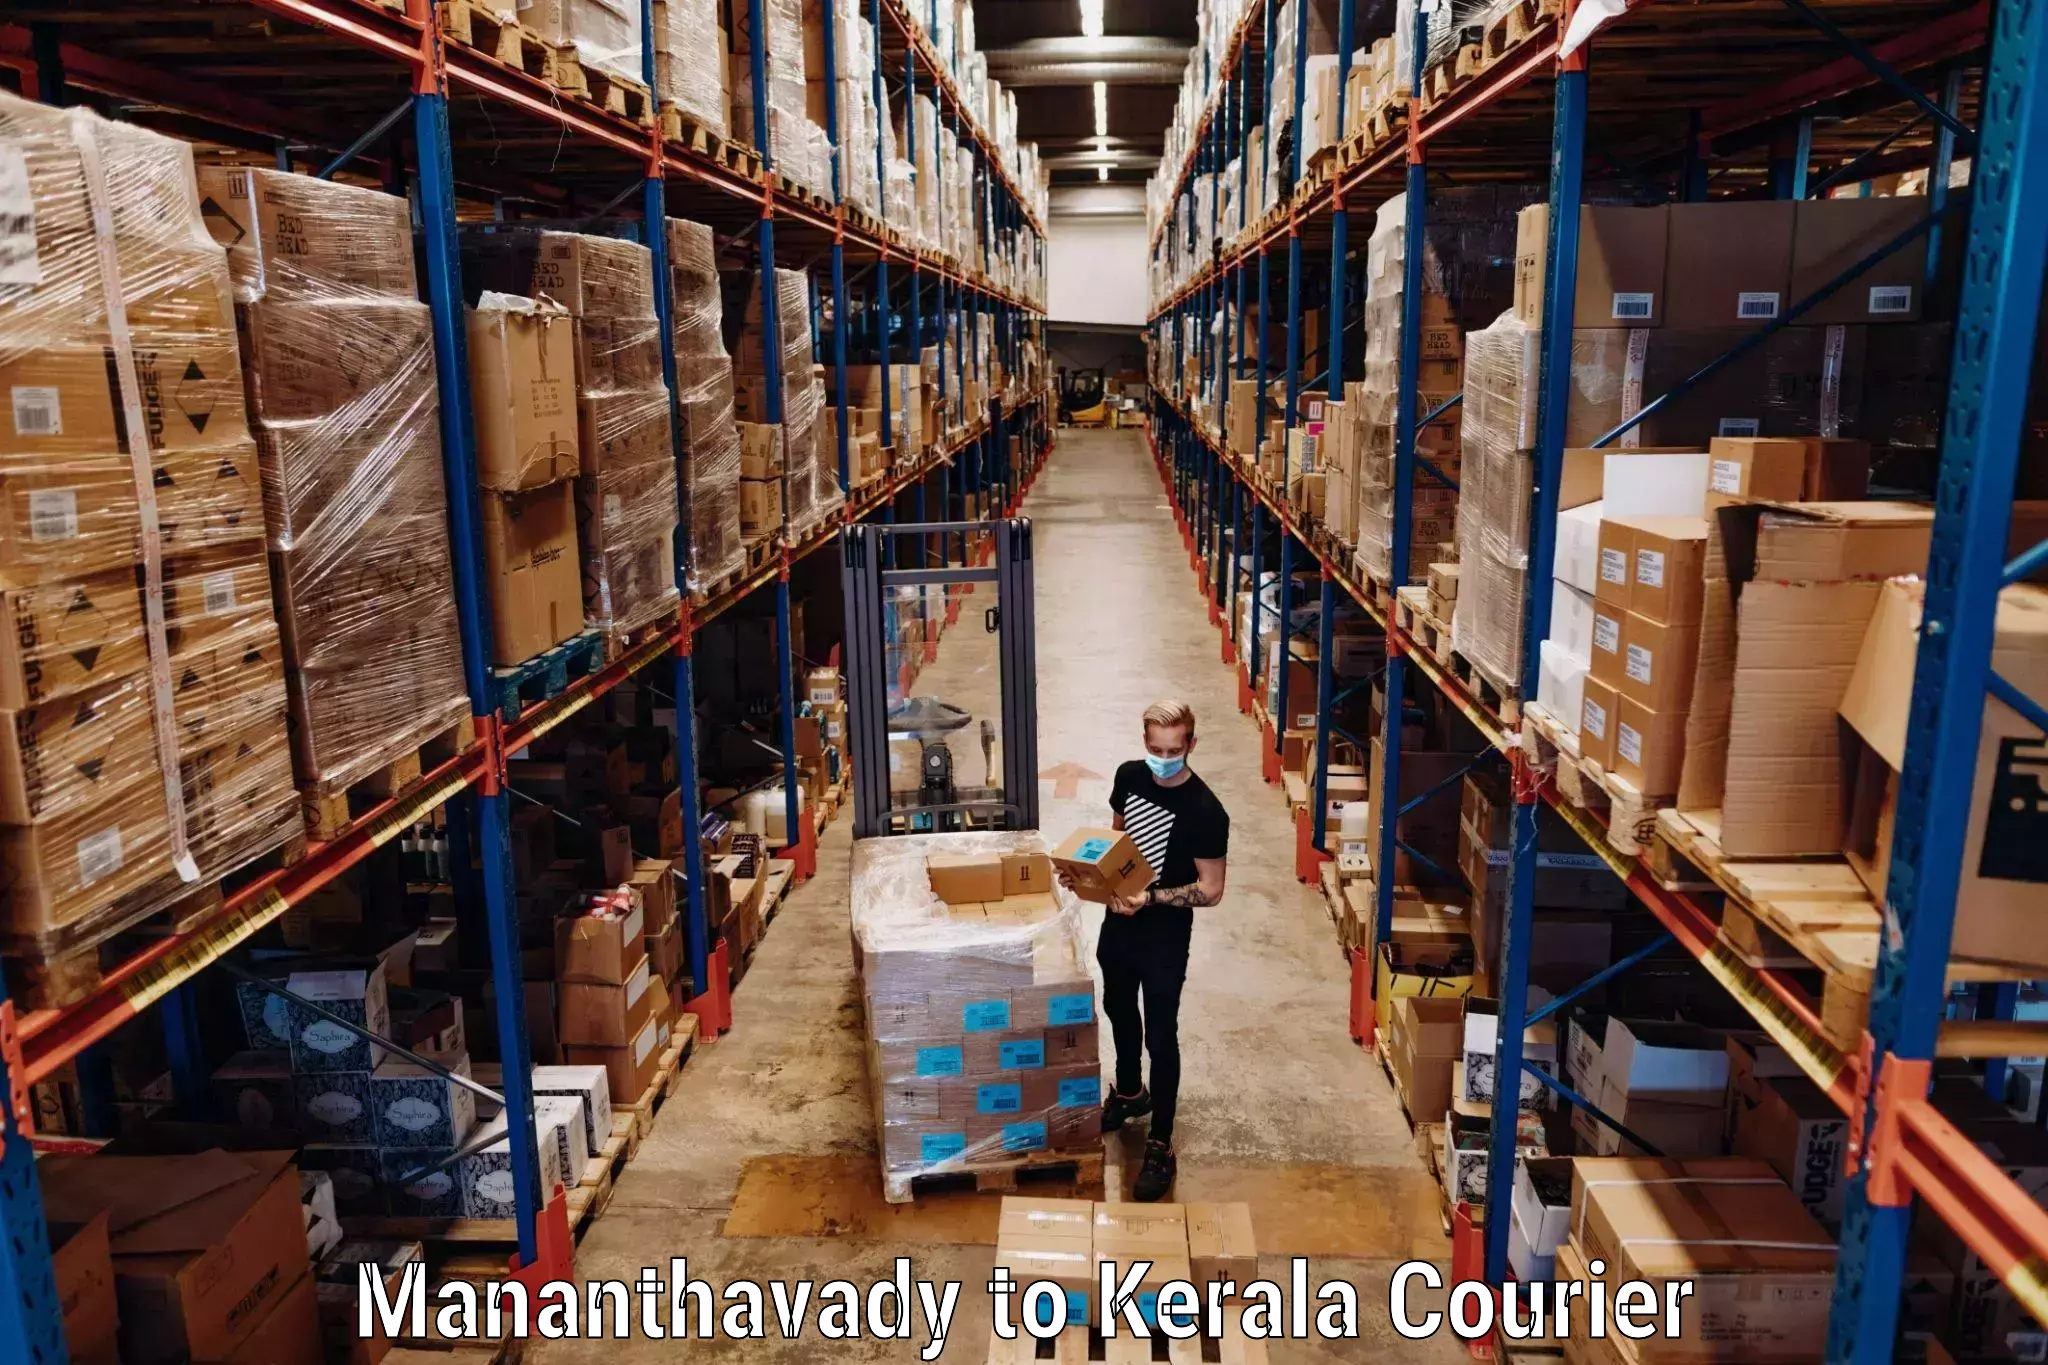 Luggage delivery system Mananthavady to Cochin Port Kochi